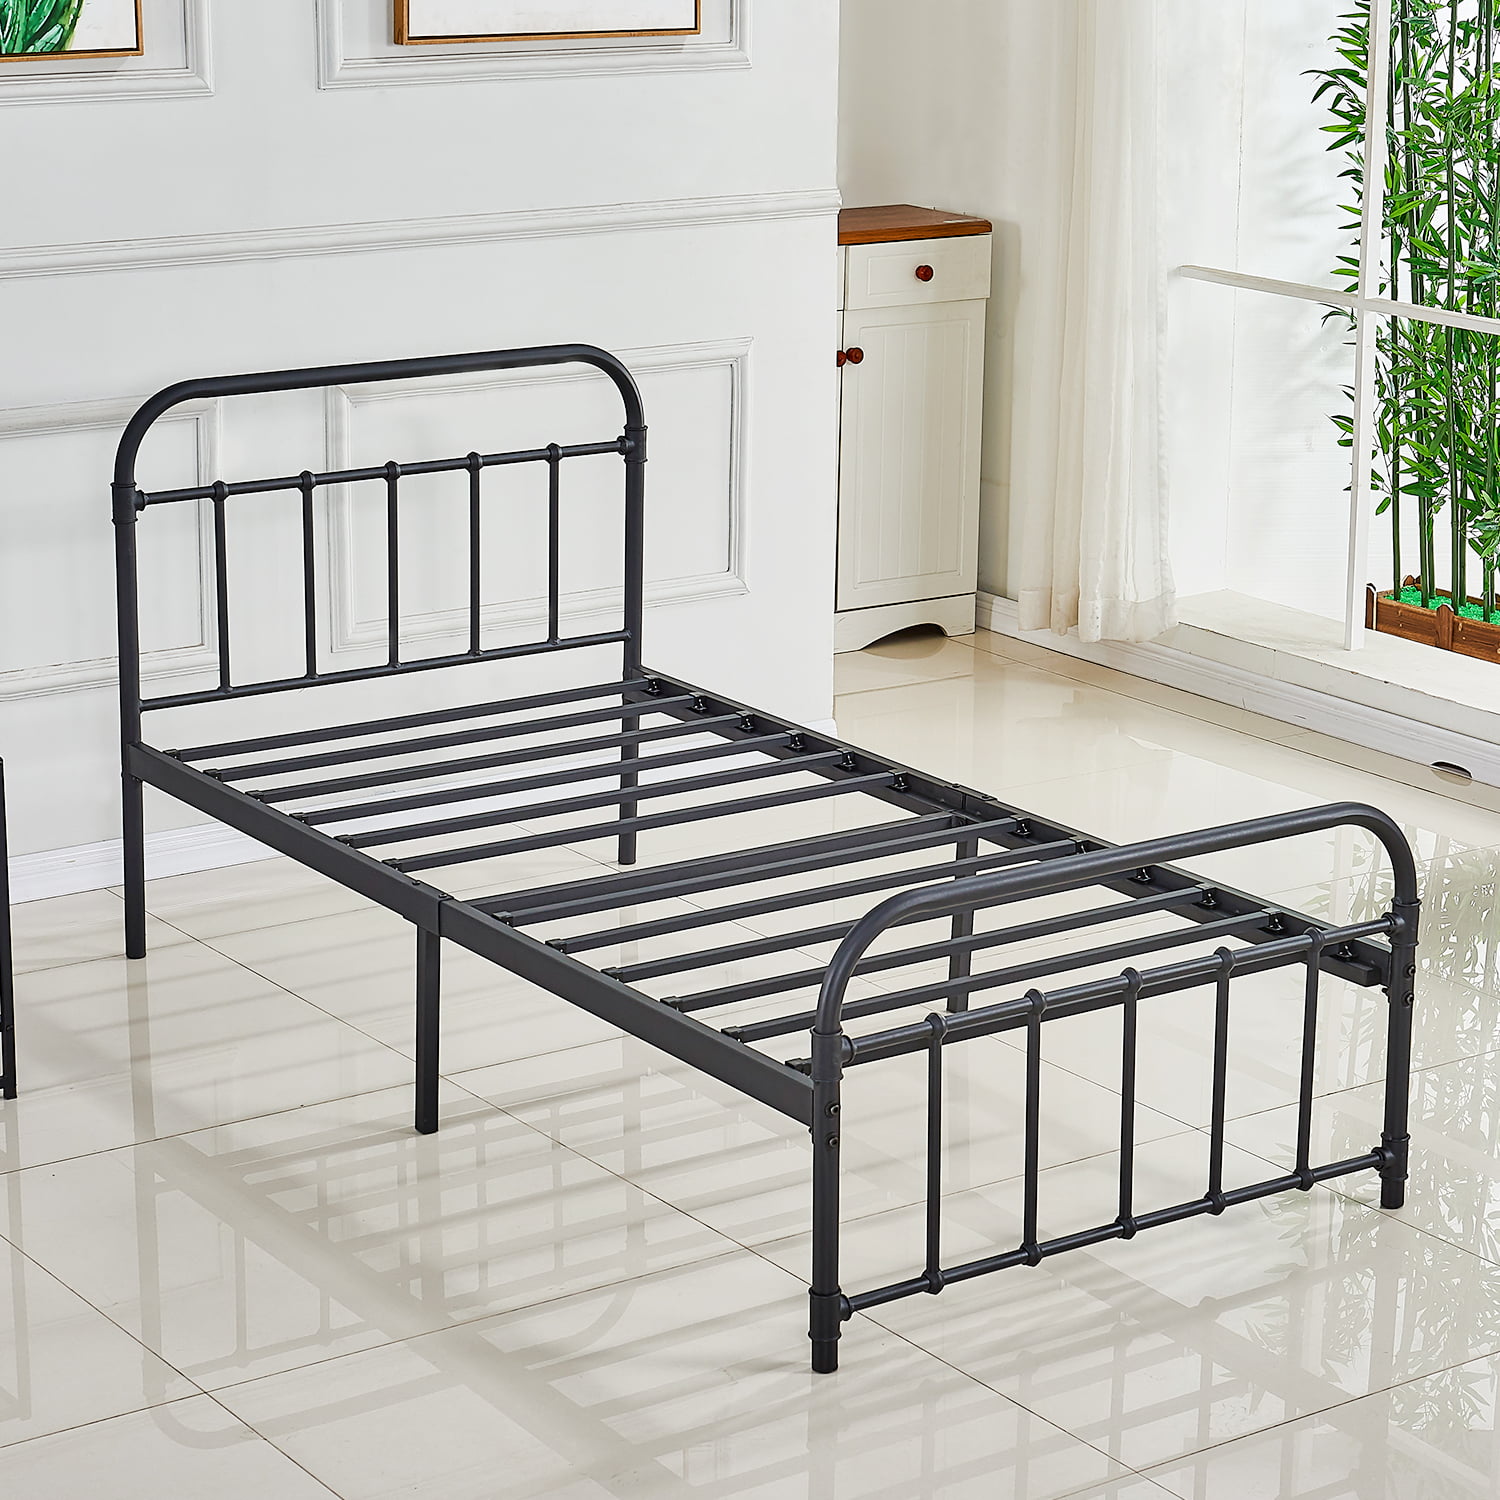 Dikapa Twin Size Bed Frame Base Metal, Twin Bed With Frame And Mattress